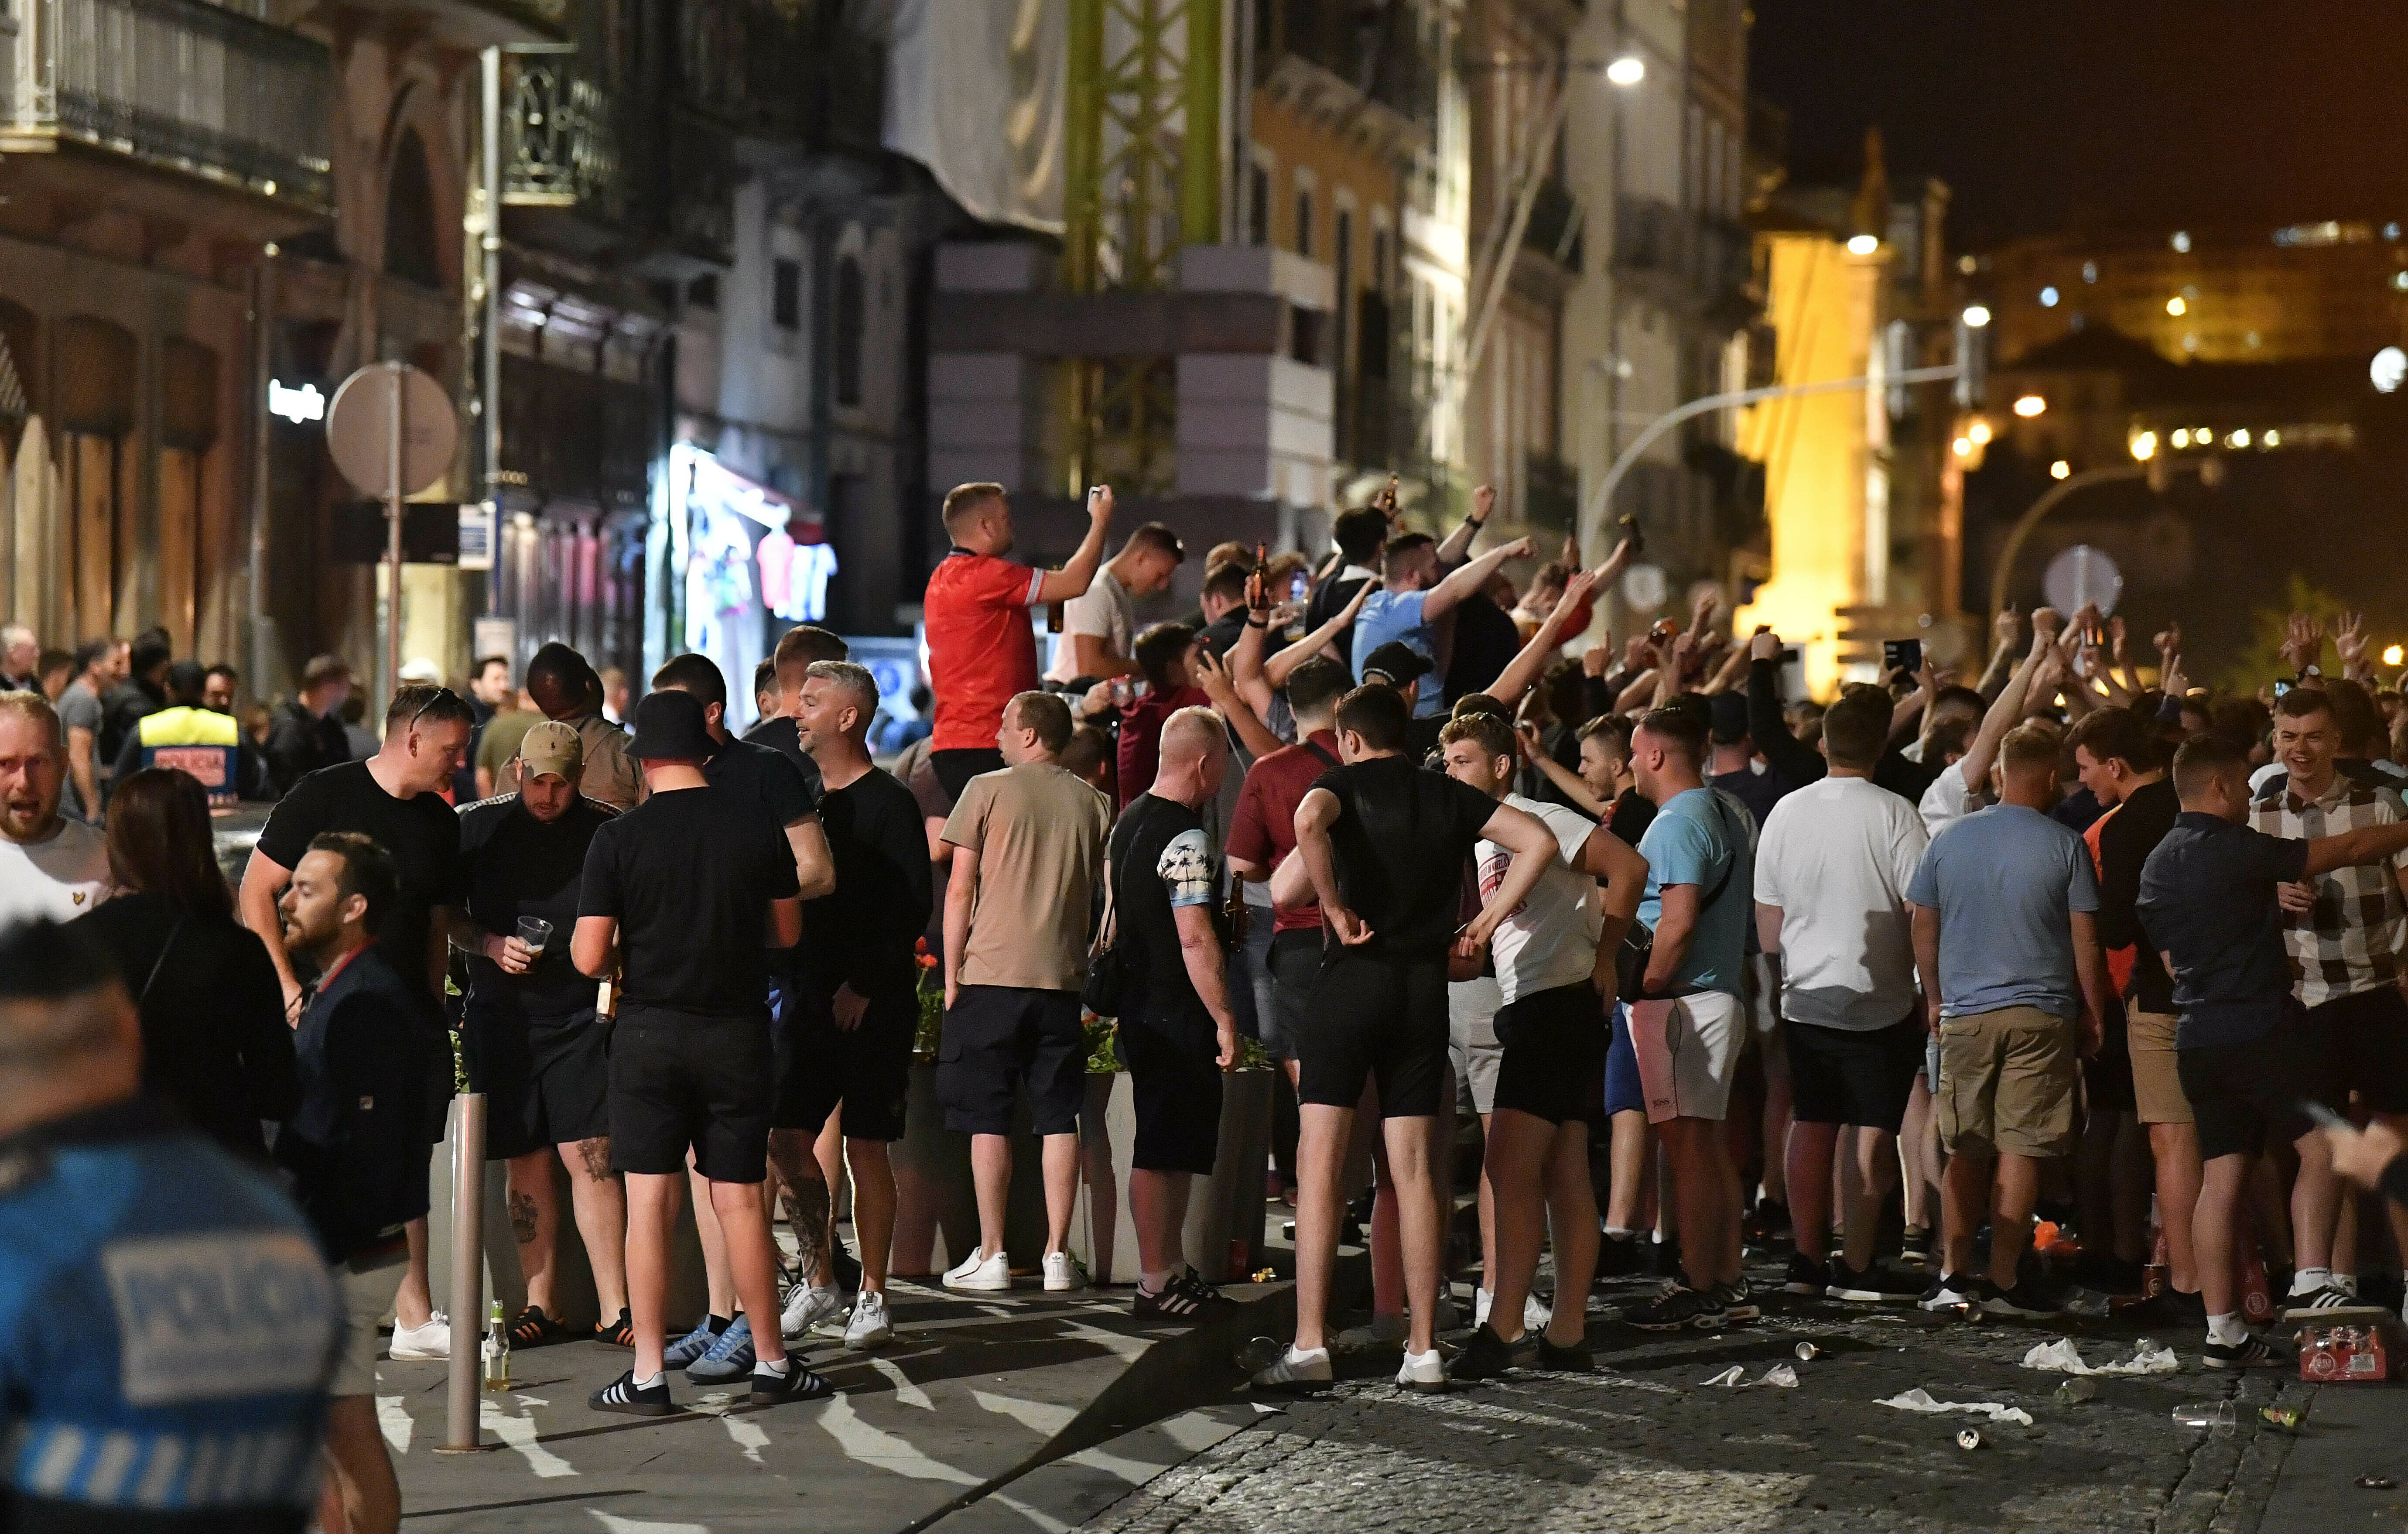 Portugal police monitoring hooligans during Nations League